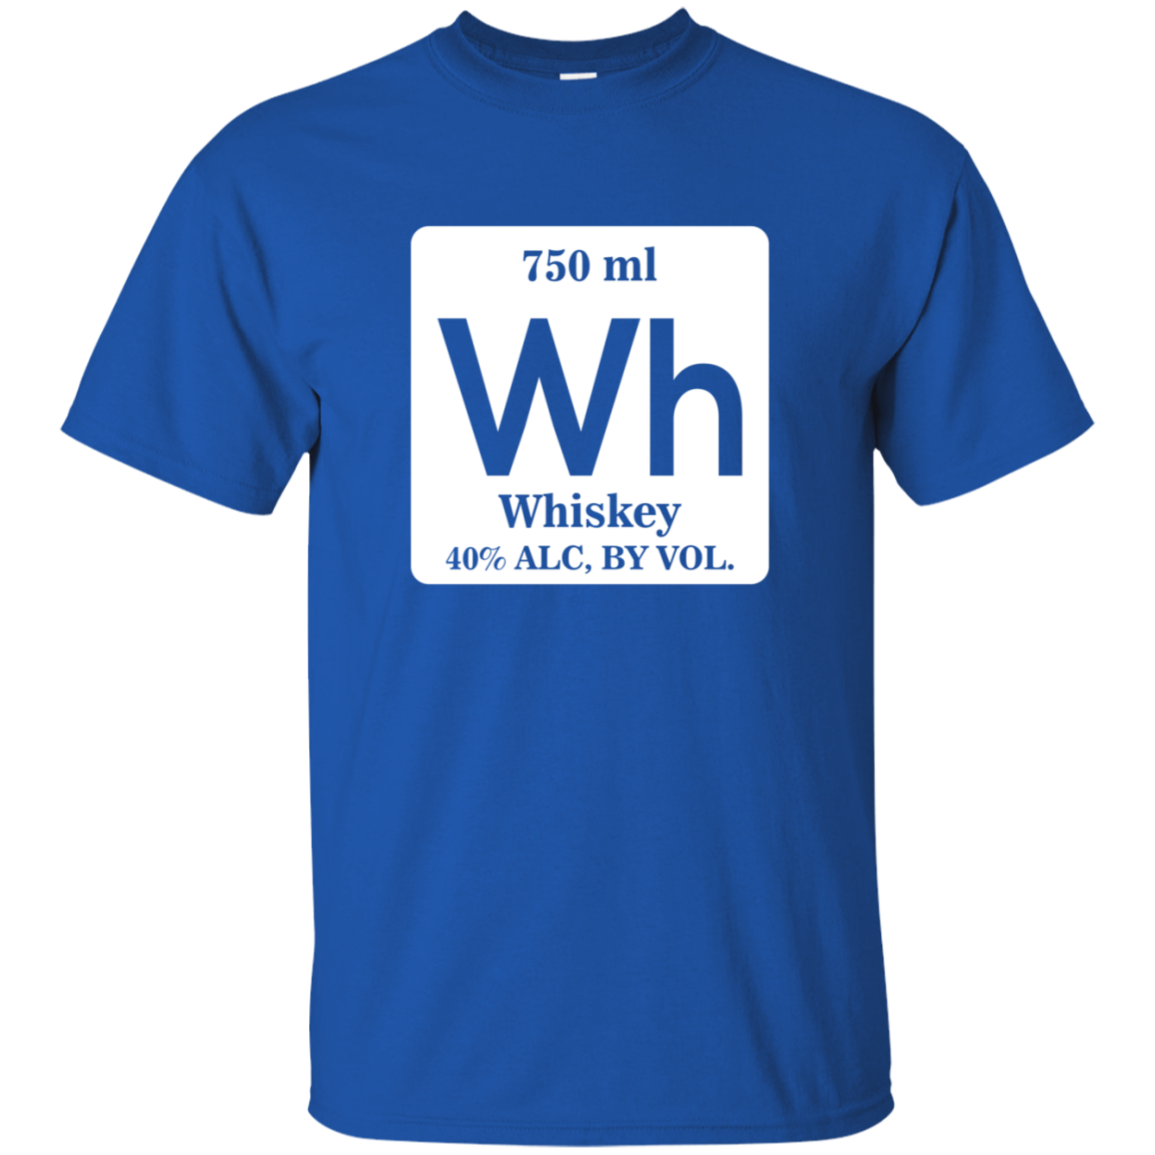 750ml Whiskey Periodic Table T-Shirt Apparel - The Beer Lodge